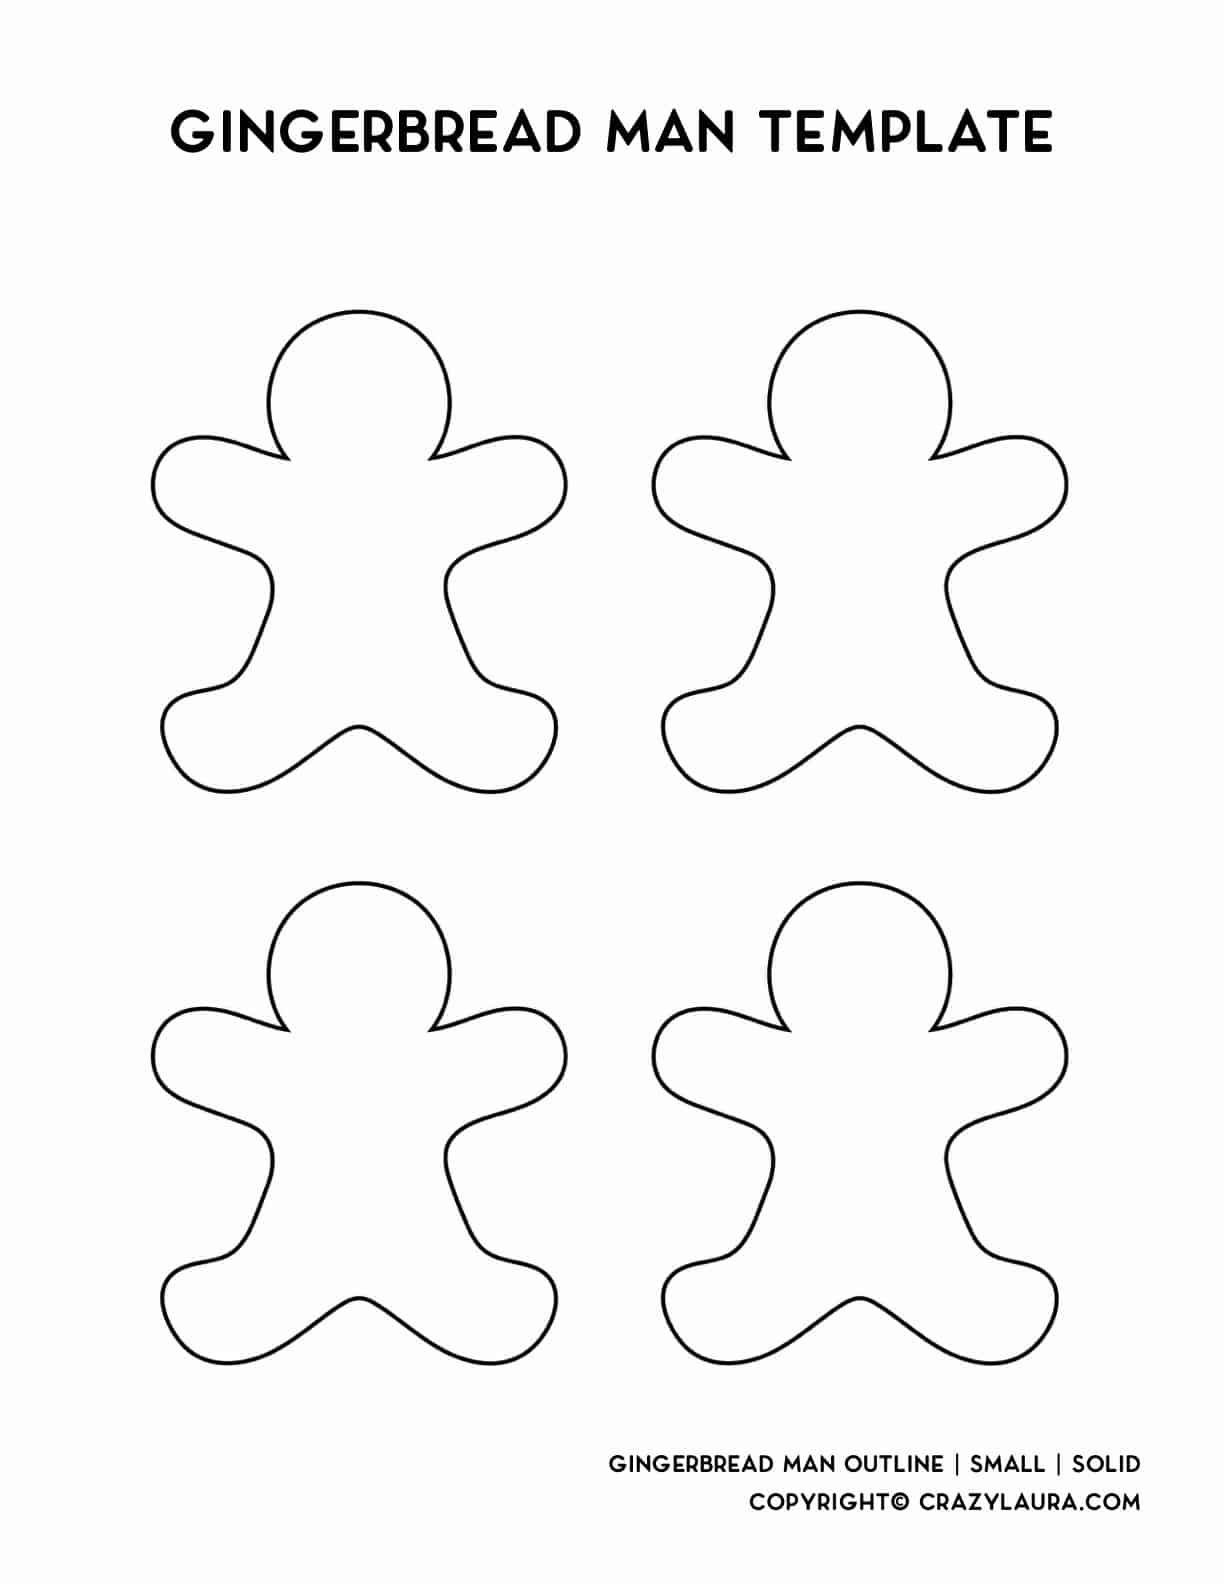 free to download small gingerbread man cut out